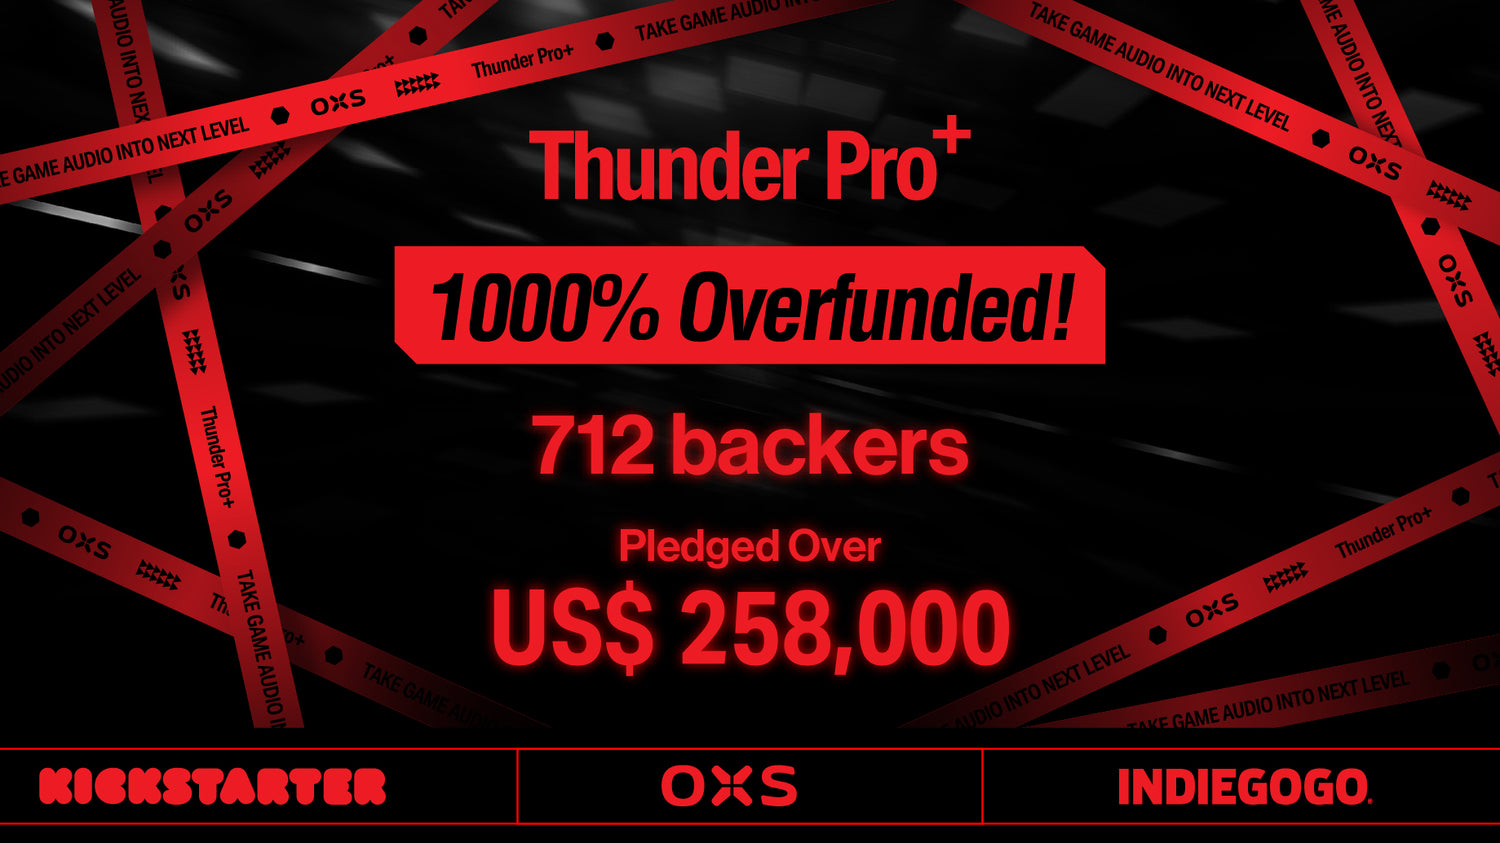 OXS Thunder Pro+ Crowdfunding Success: From Backers to Believers